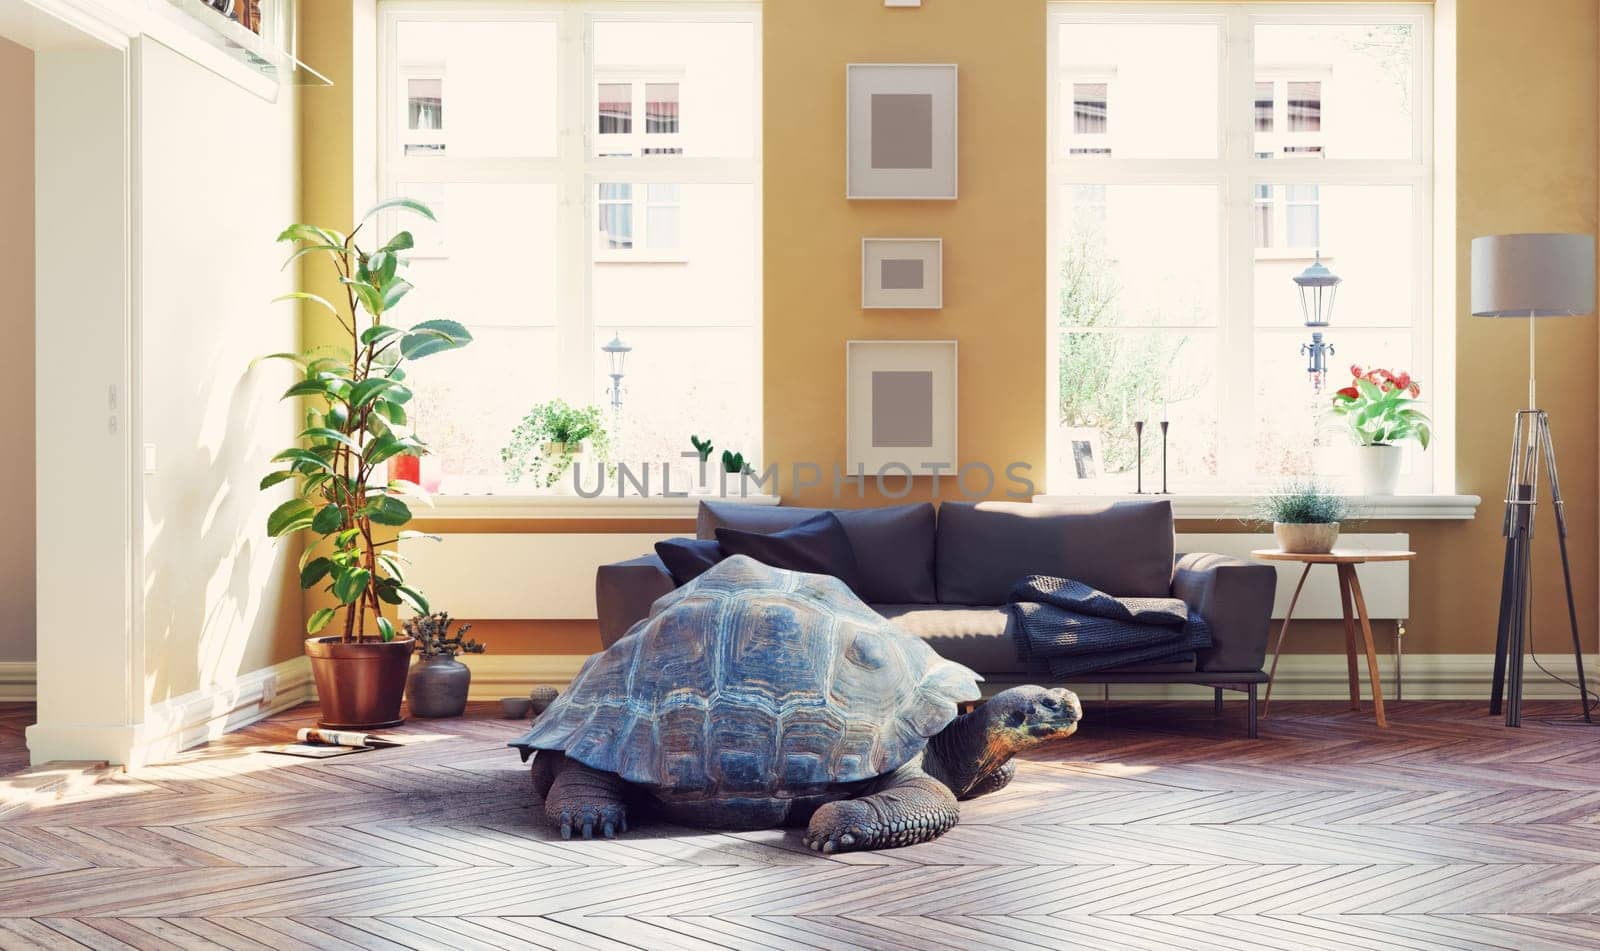 giant turtle in the living room. by vicnt